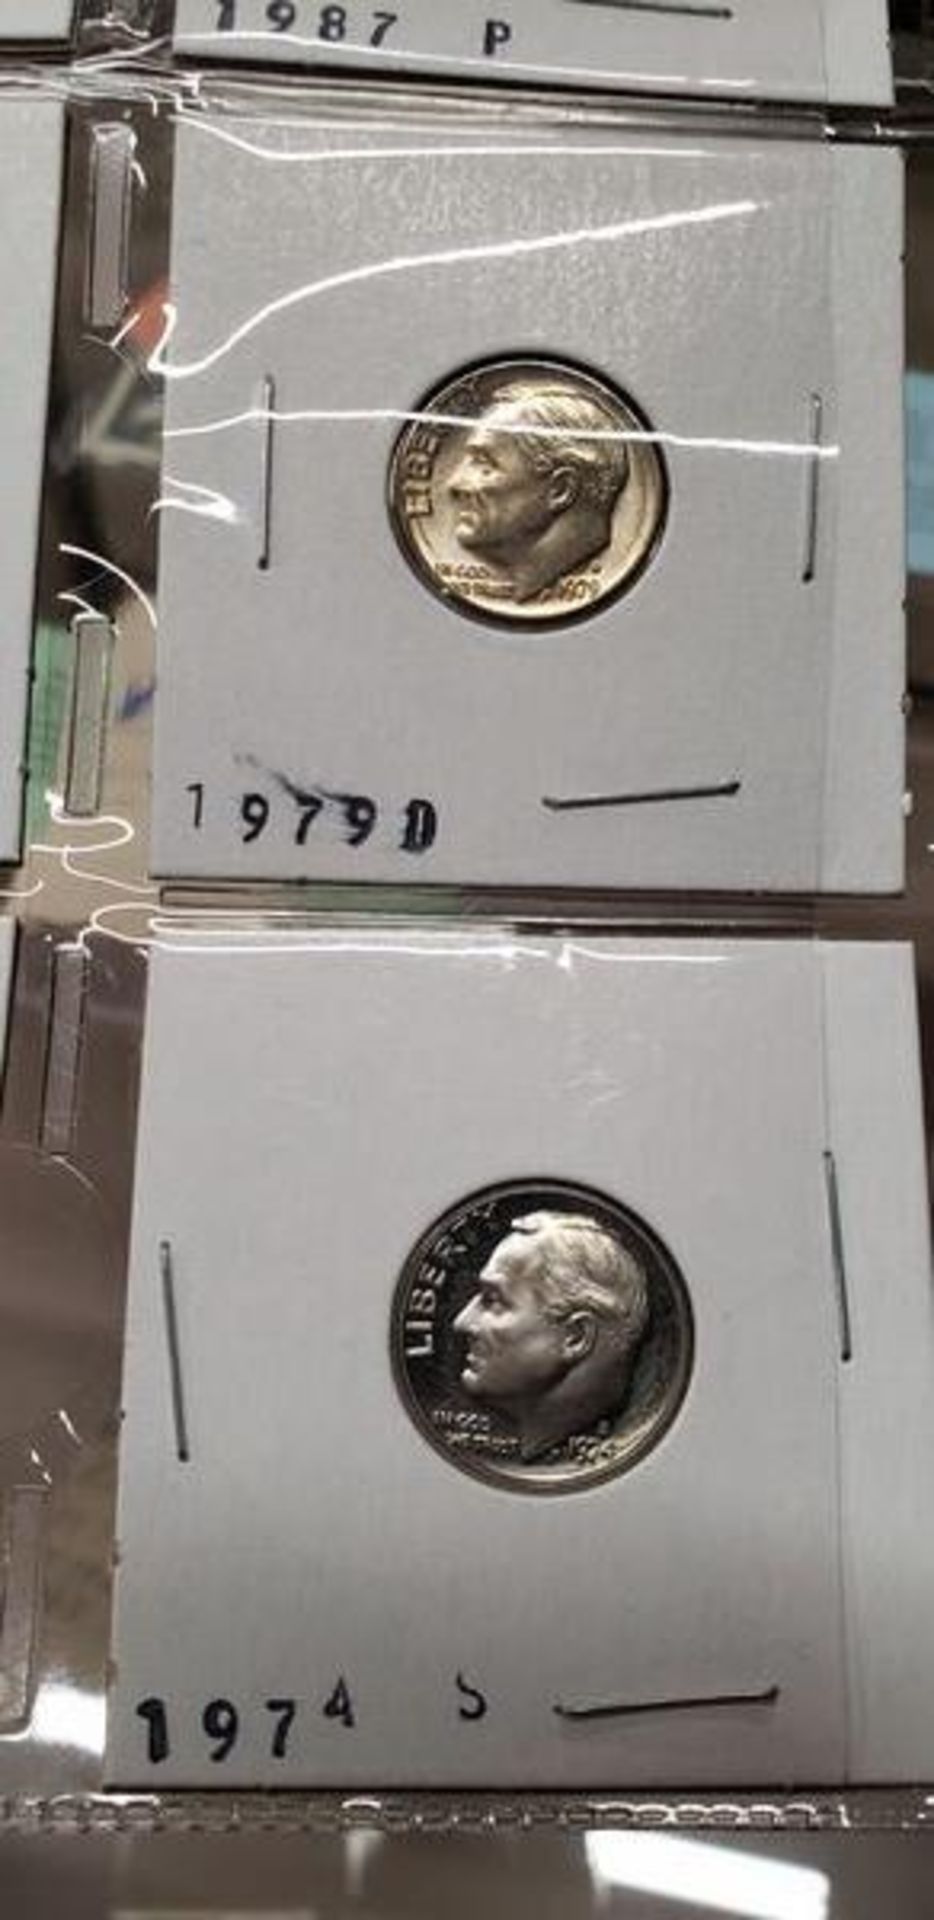 LOT OF 8 BRILLIANT UNCIRCULATED ROOSEVELT DIMES 1974 D AND S, 1978P, 1979D, 1987 D AND P, 1996D AND - Image 5 of 9